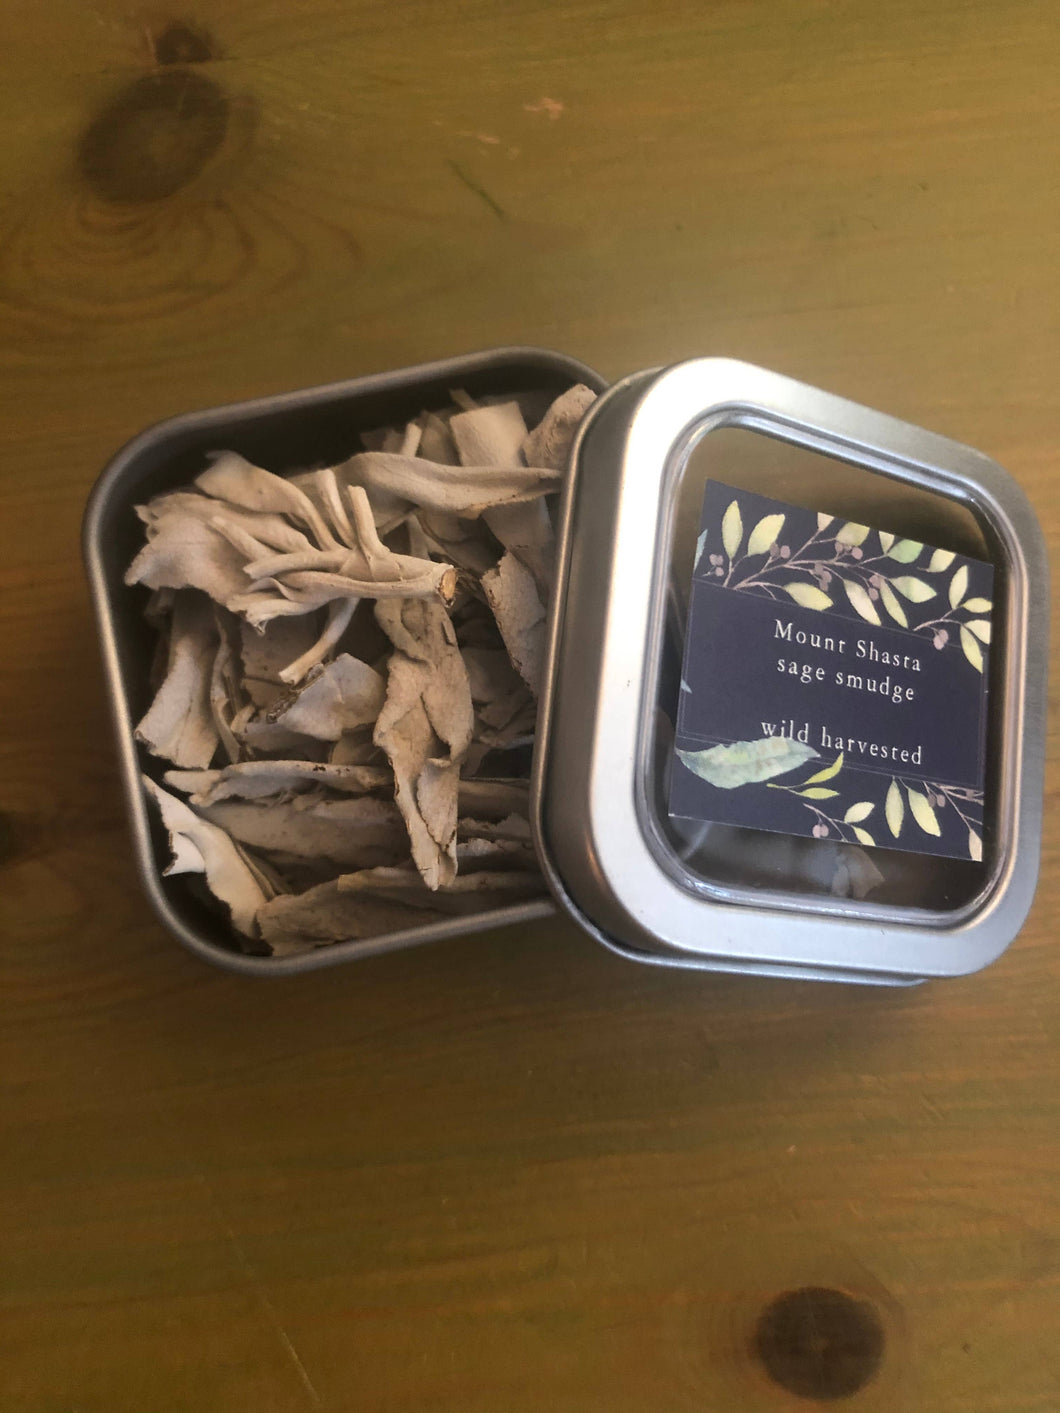 Sustainably harvested Sage smudge TIPS